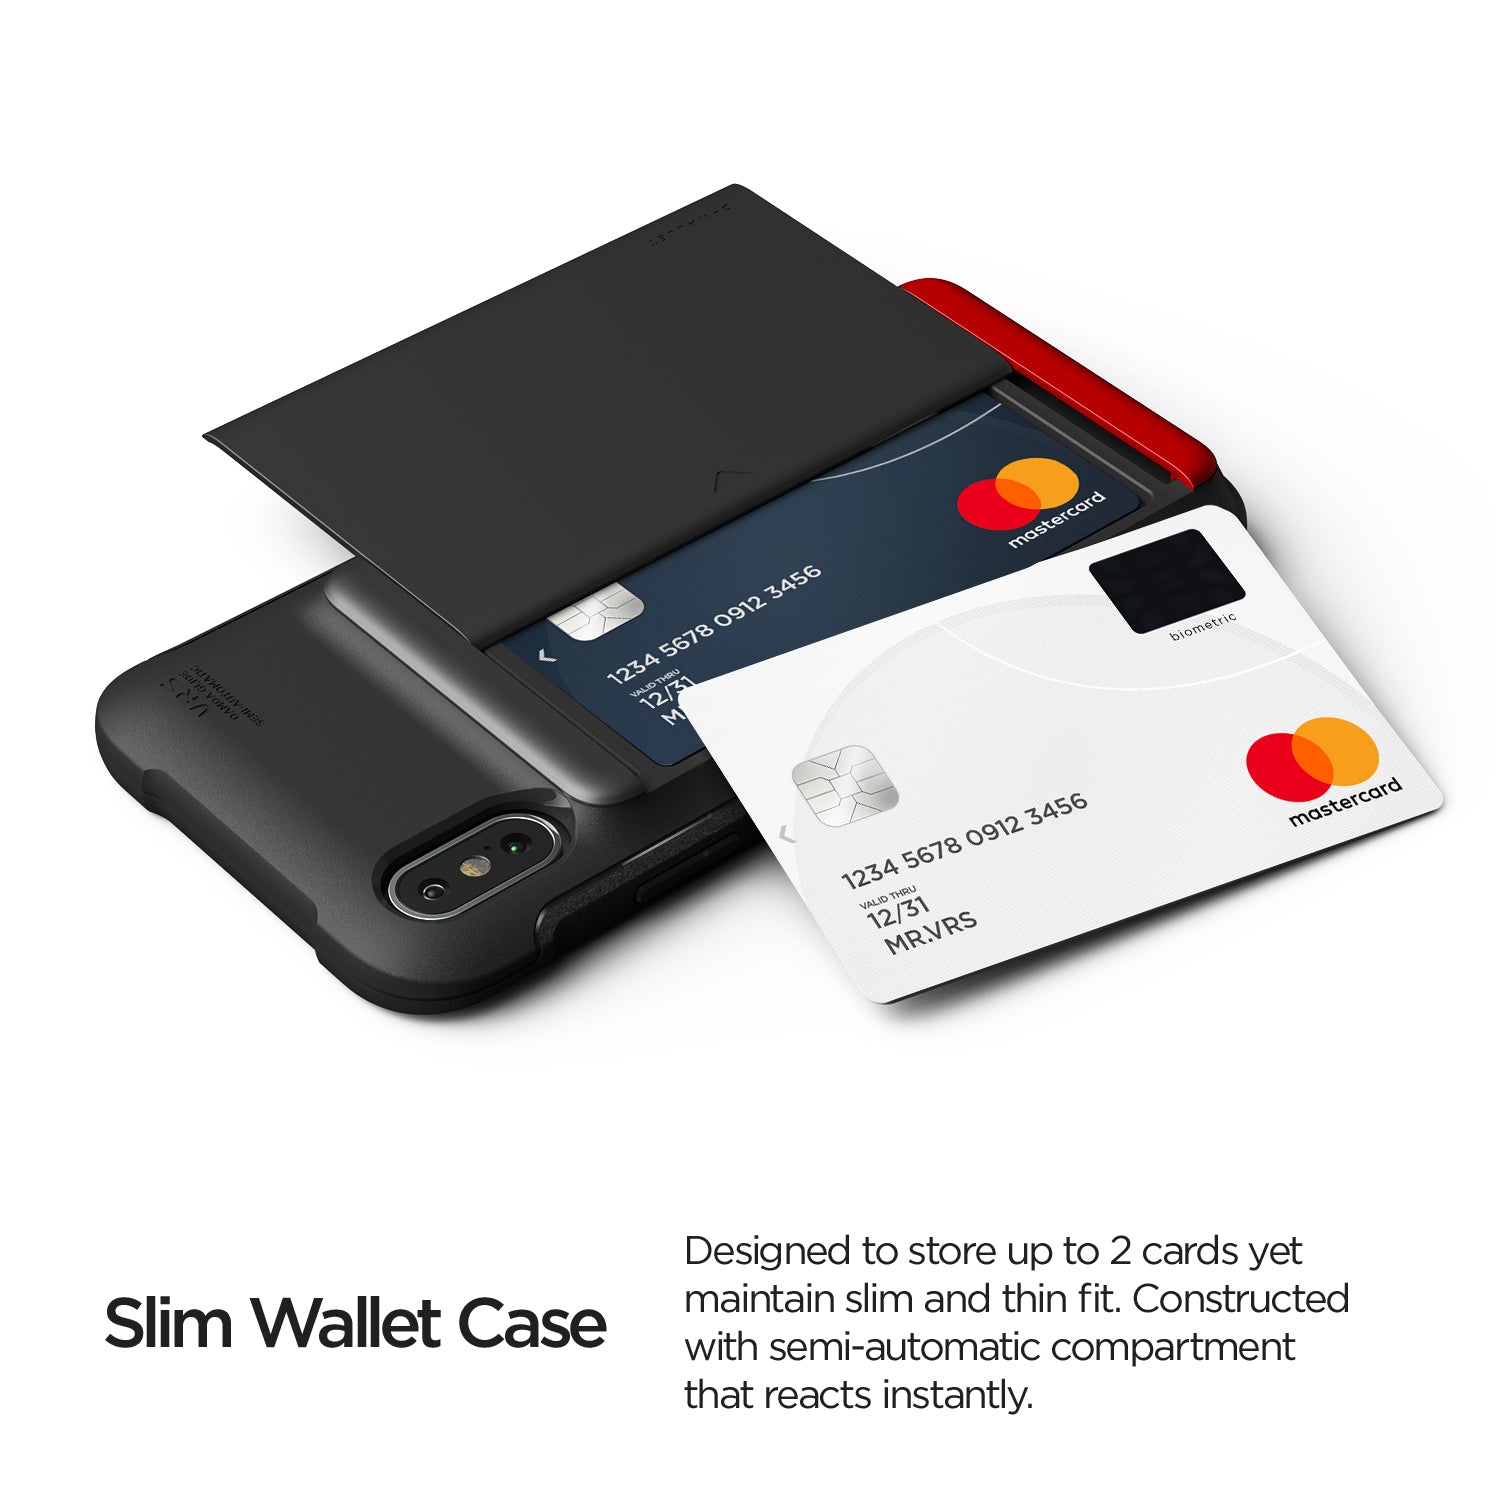 Apple Xs rugged Glide wallet case with multiple durable and convenient card slot with sleek minimalist look by VRS